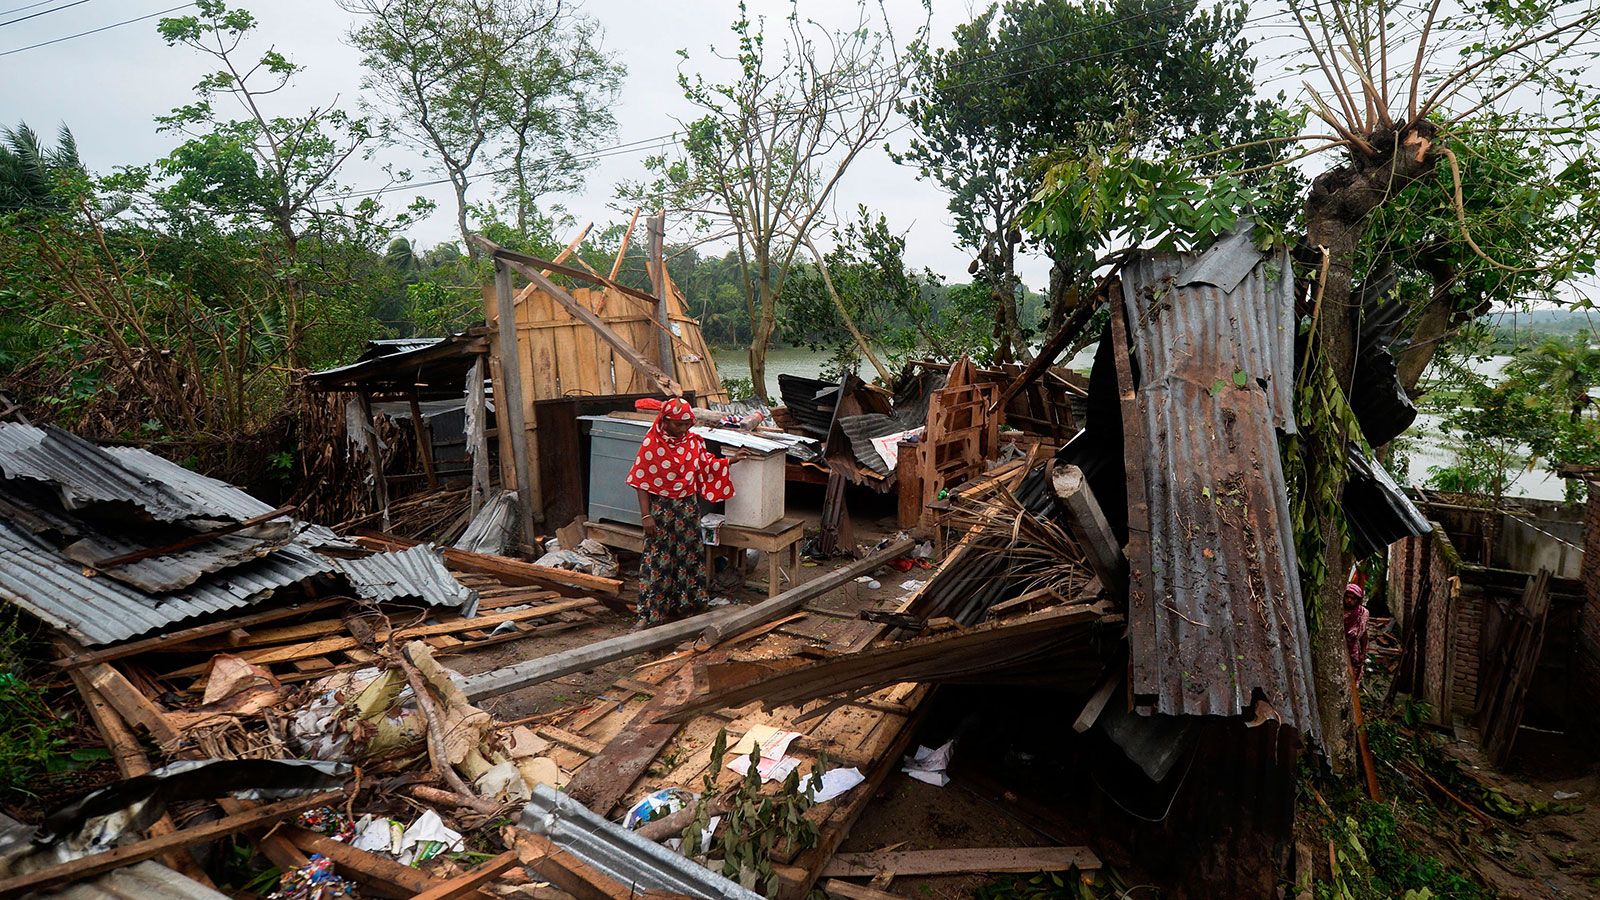 A woman stands amidst the debris of her house damaged by Cyclone Amphan in Satkhira on May 21.